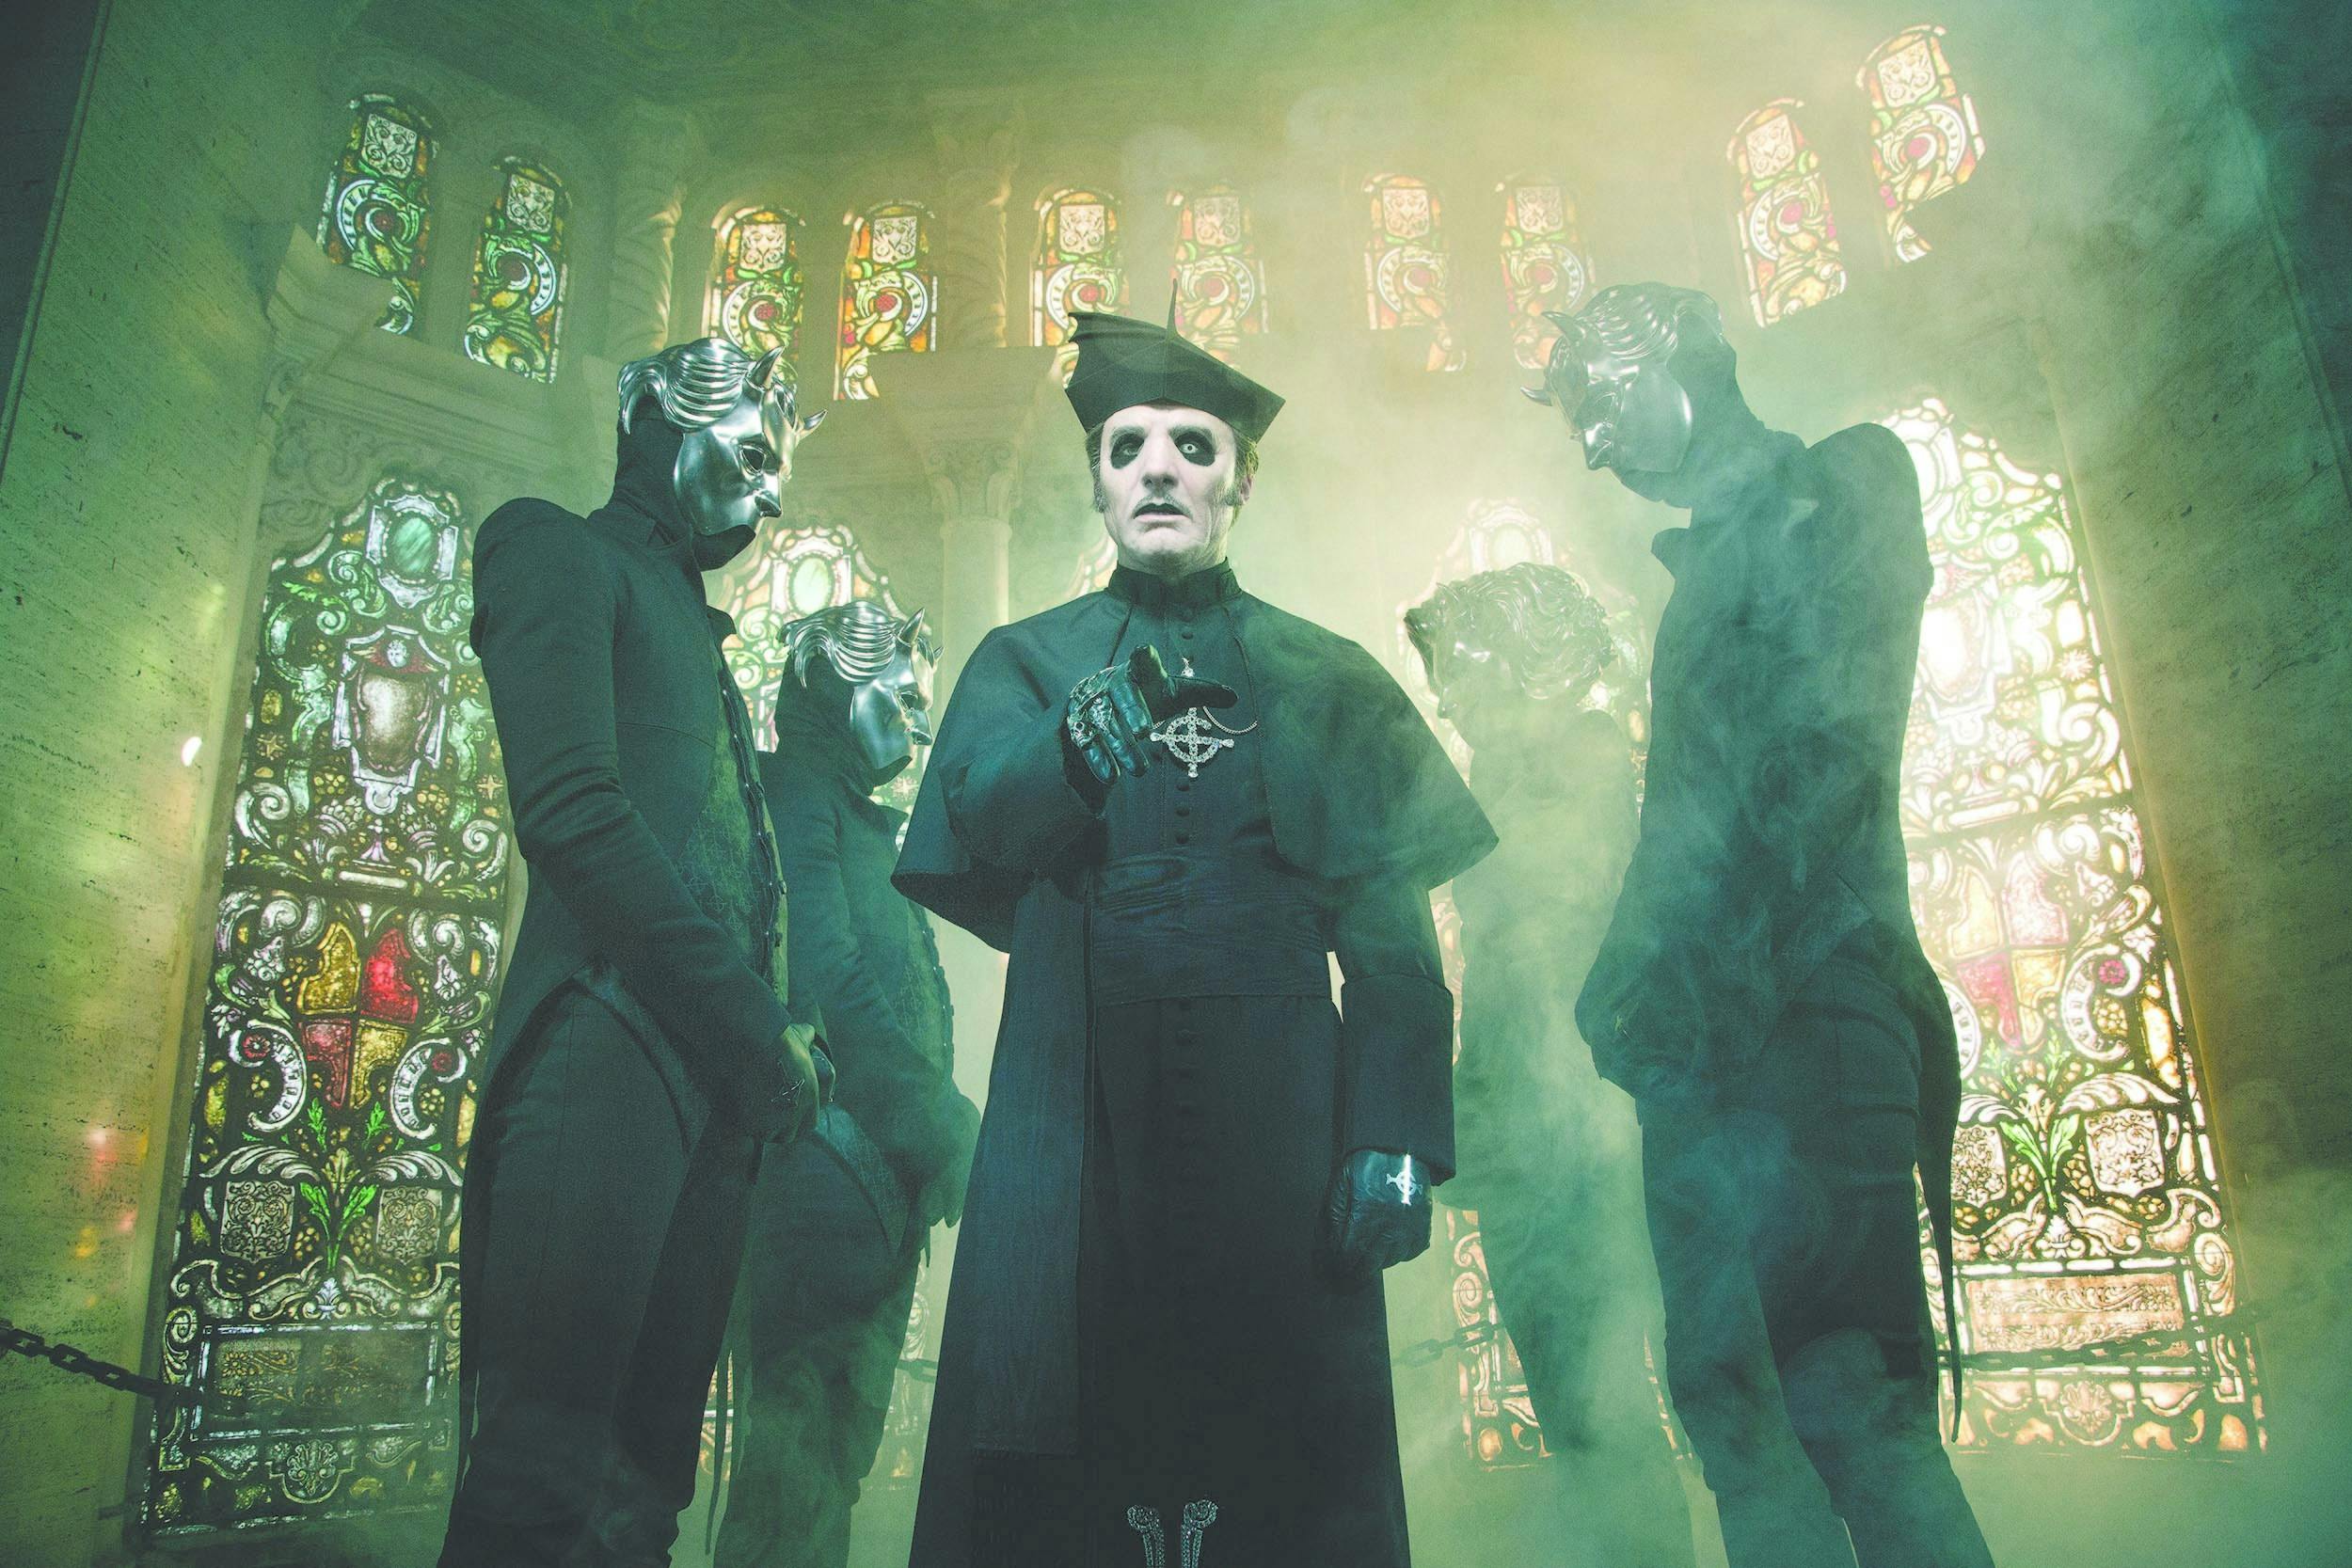 Ghost Are All About "Bringing Glory To Satan", Claims Texas Pastor